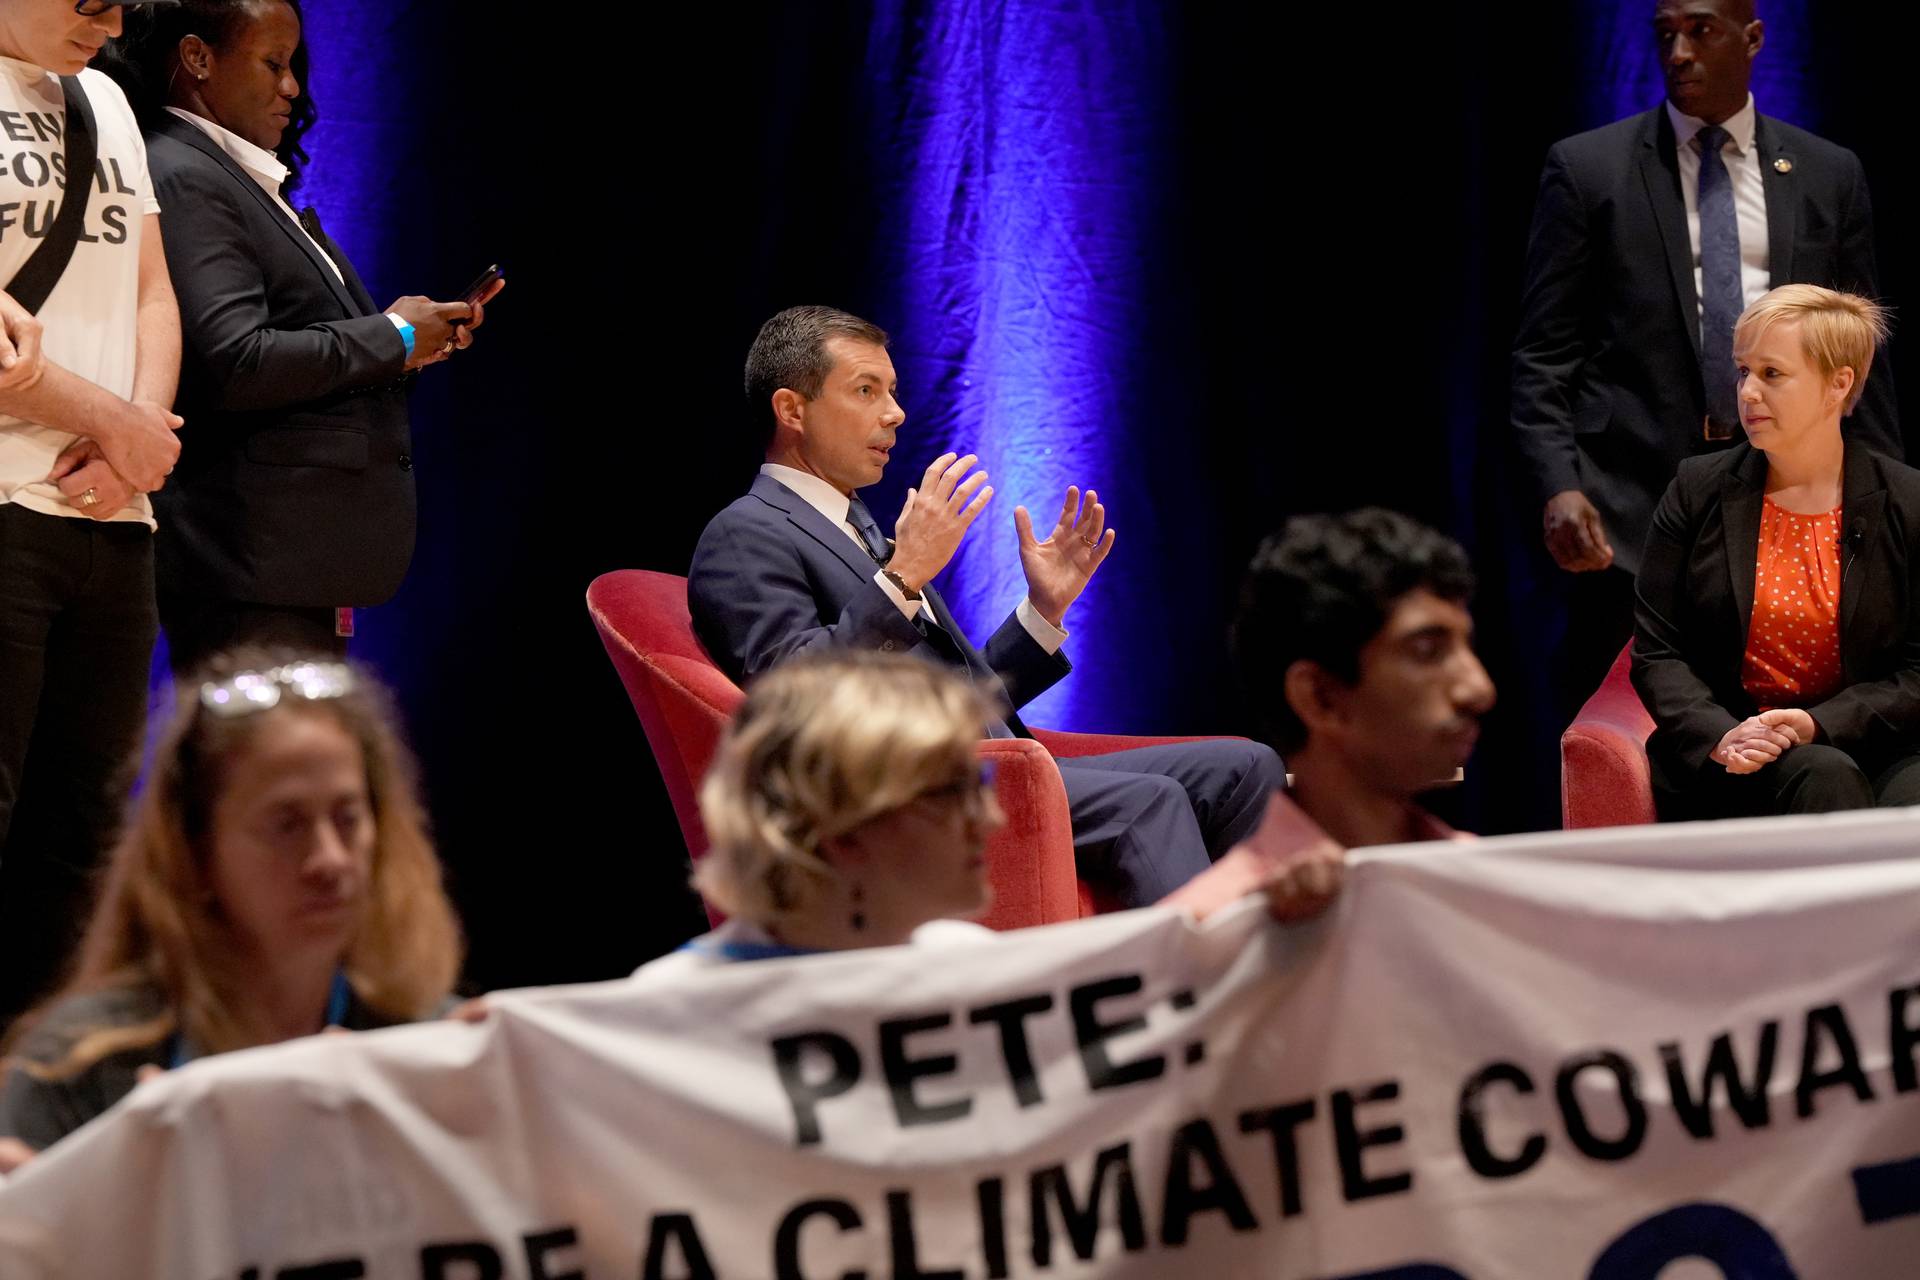 The group Climate Defiance disrupted a conversation with U.S. Secretary of Transportation Pete Buttigieg at the iMPACT Maryland conference hosted by The Baltimore Banner on Tuesday, Oct. 10, 2023.